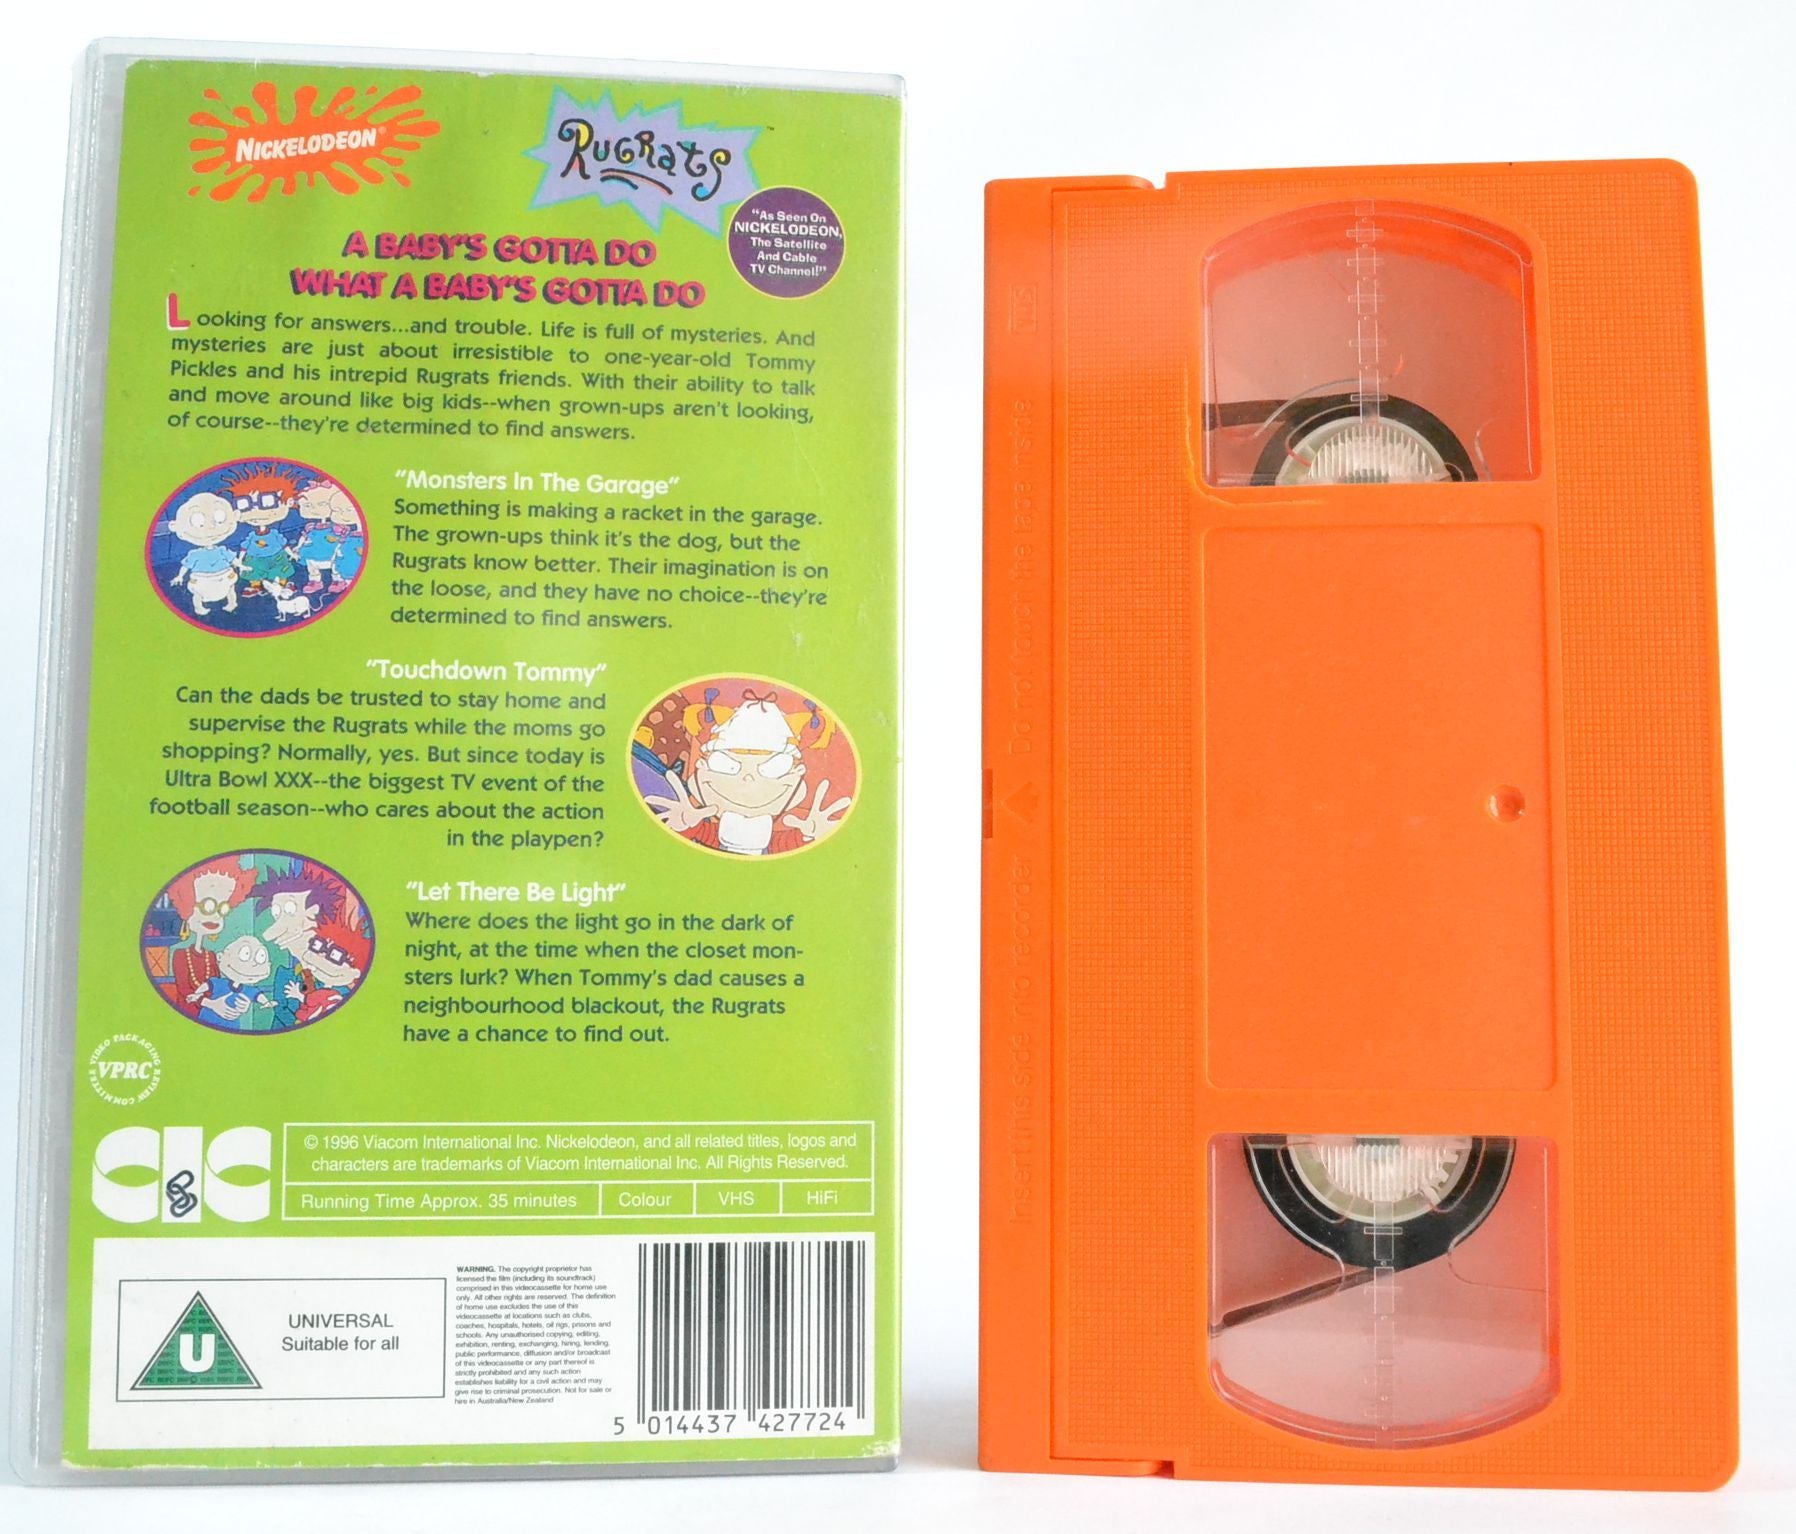 Rugrats: A Baby’s Gotta Do What A Baby’s Gotta Do - 4 Children’ Animations - VHS-